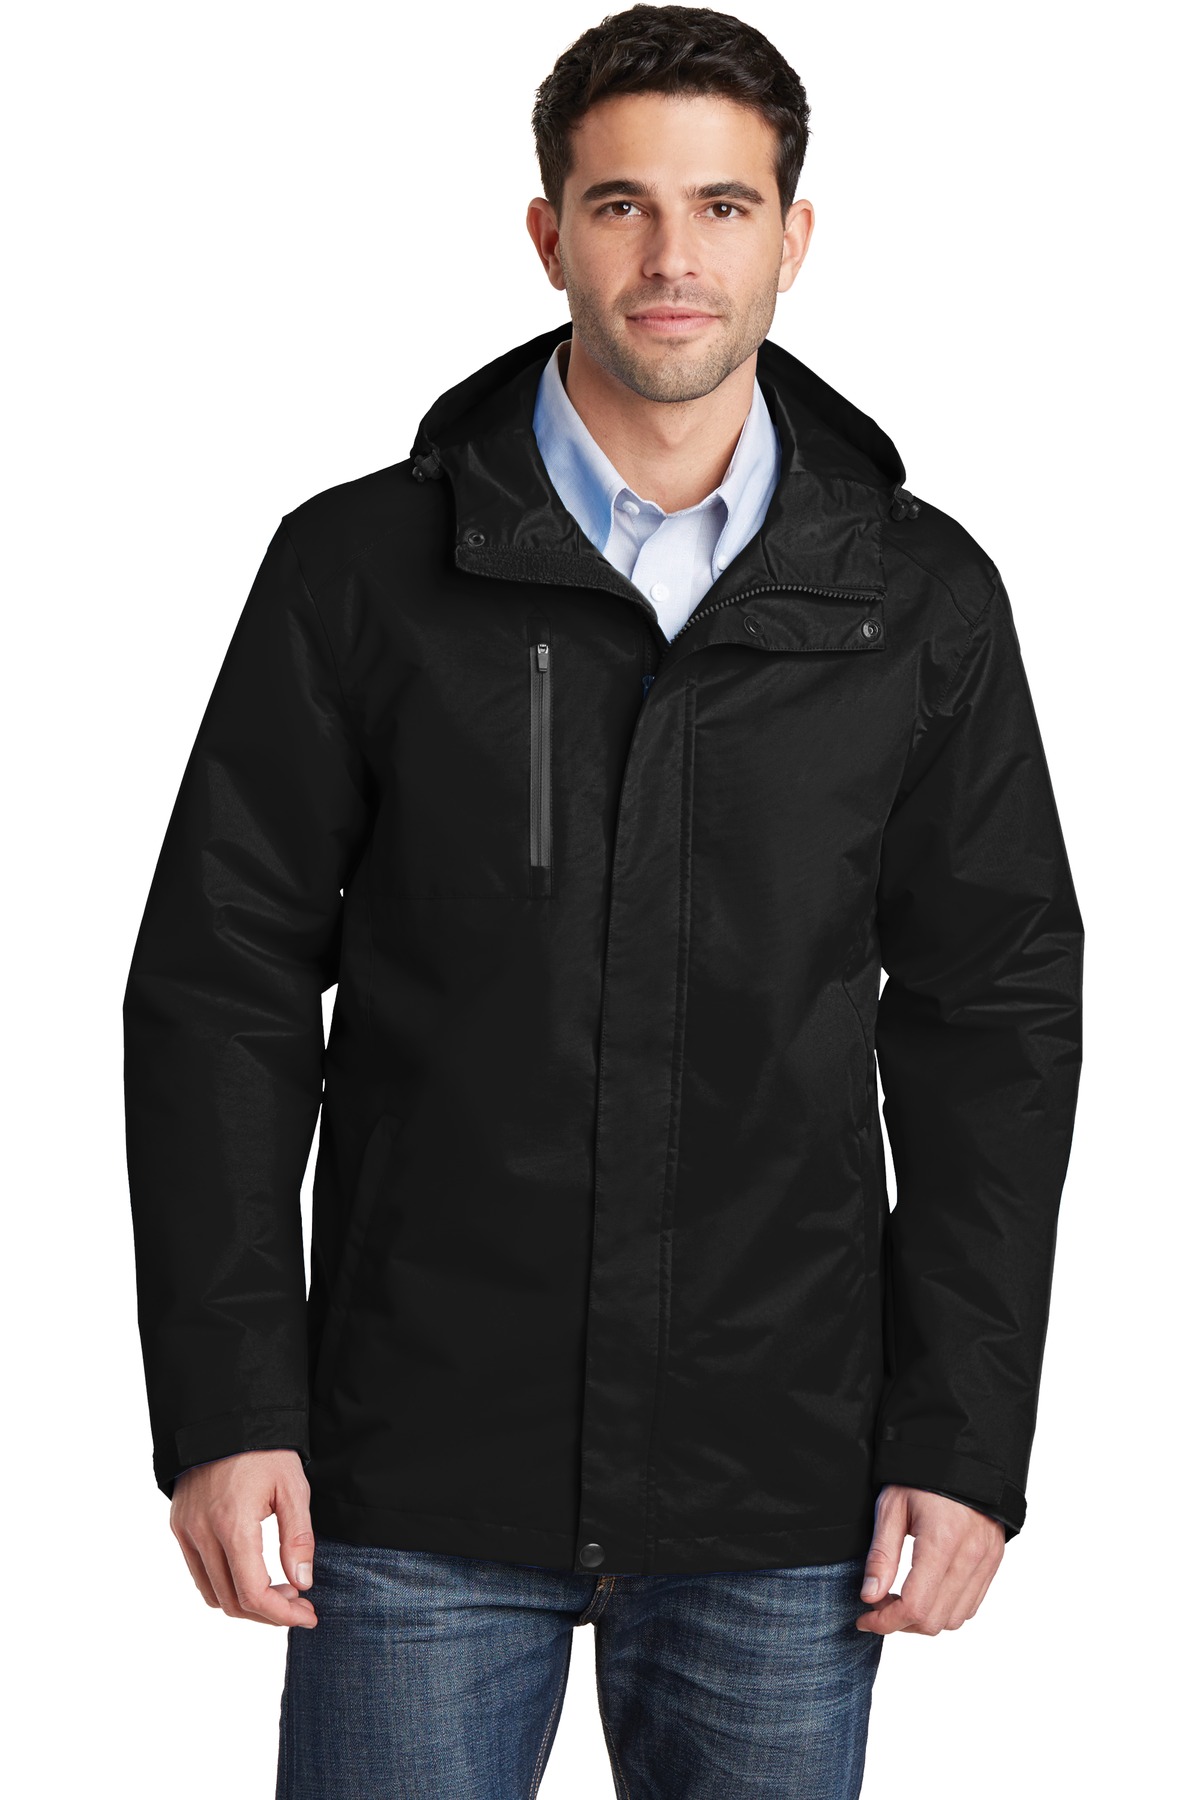 Port Authority Hospitality Outerwear ® All-Conditions Jacket.-Port Authority